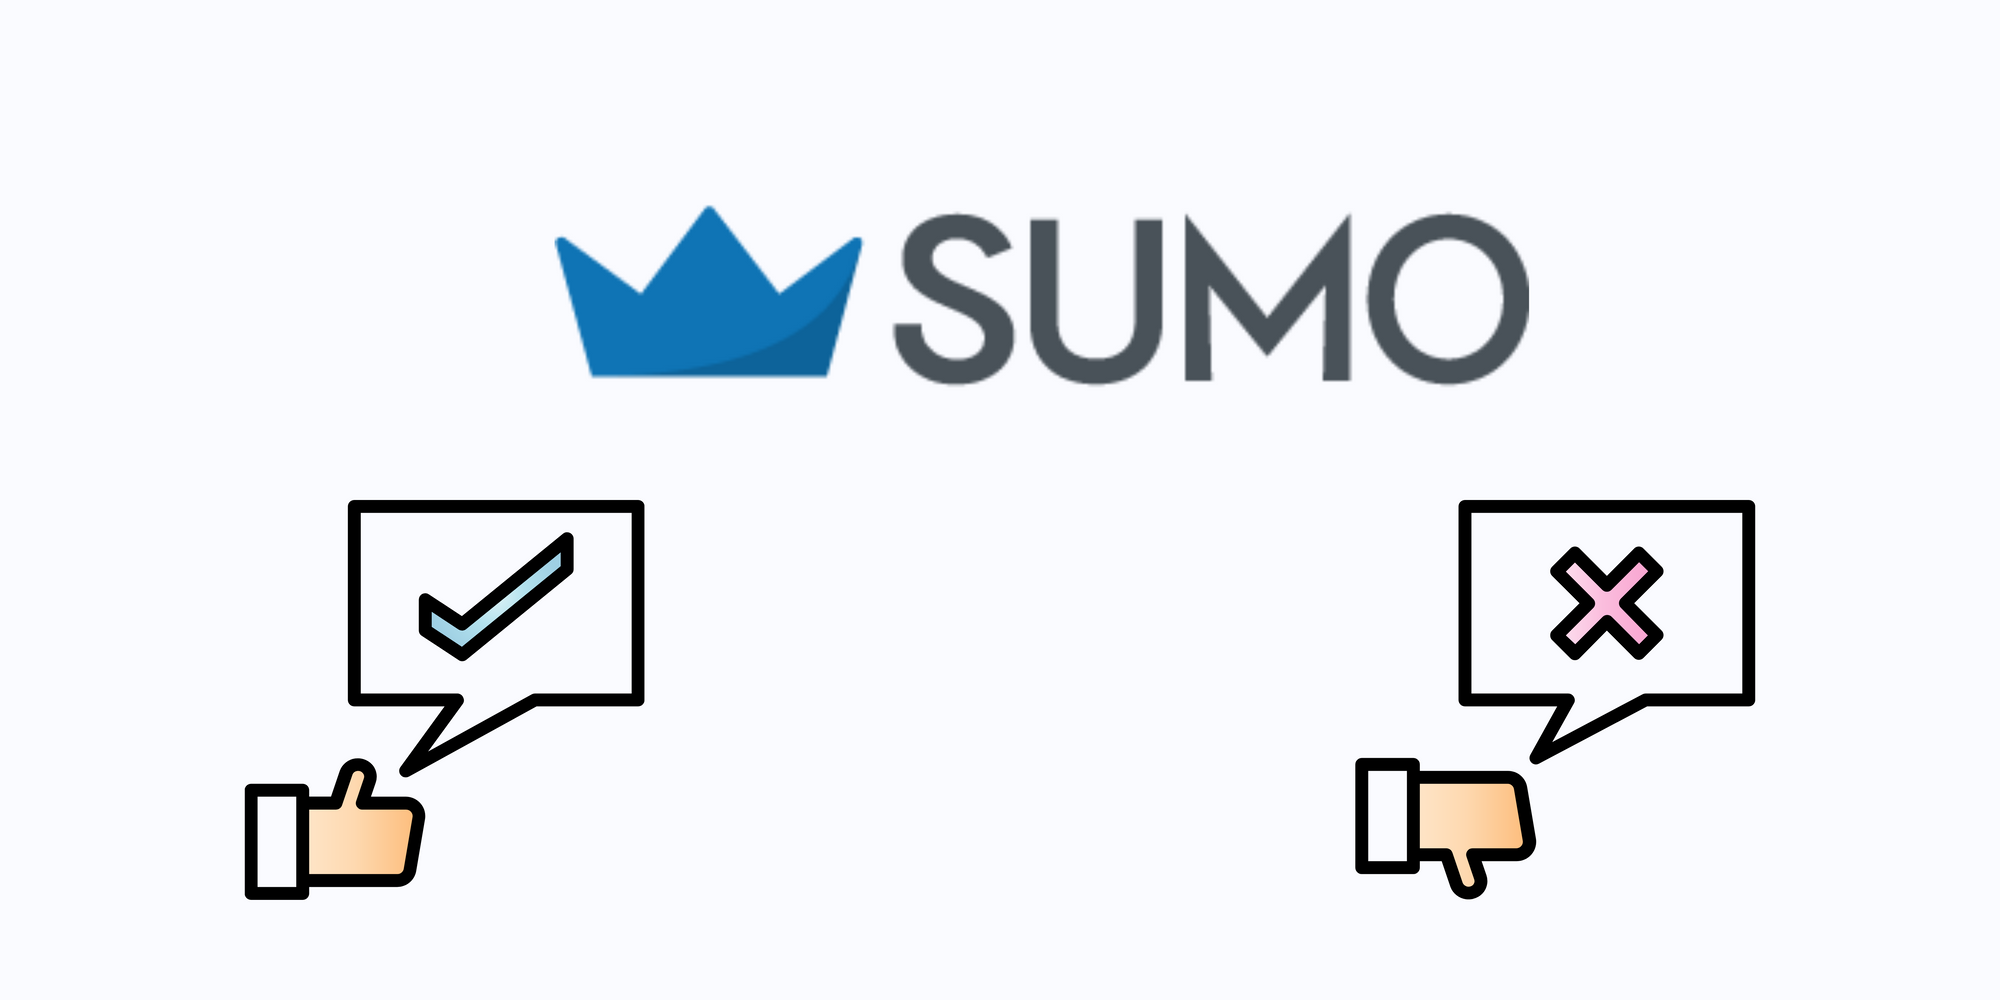 Sumo icon, check and x icons with thumbs-up & thumbs-down on blue background to talk about the pros and cons